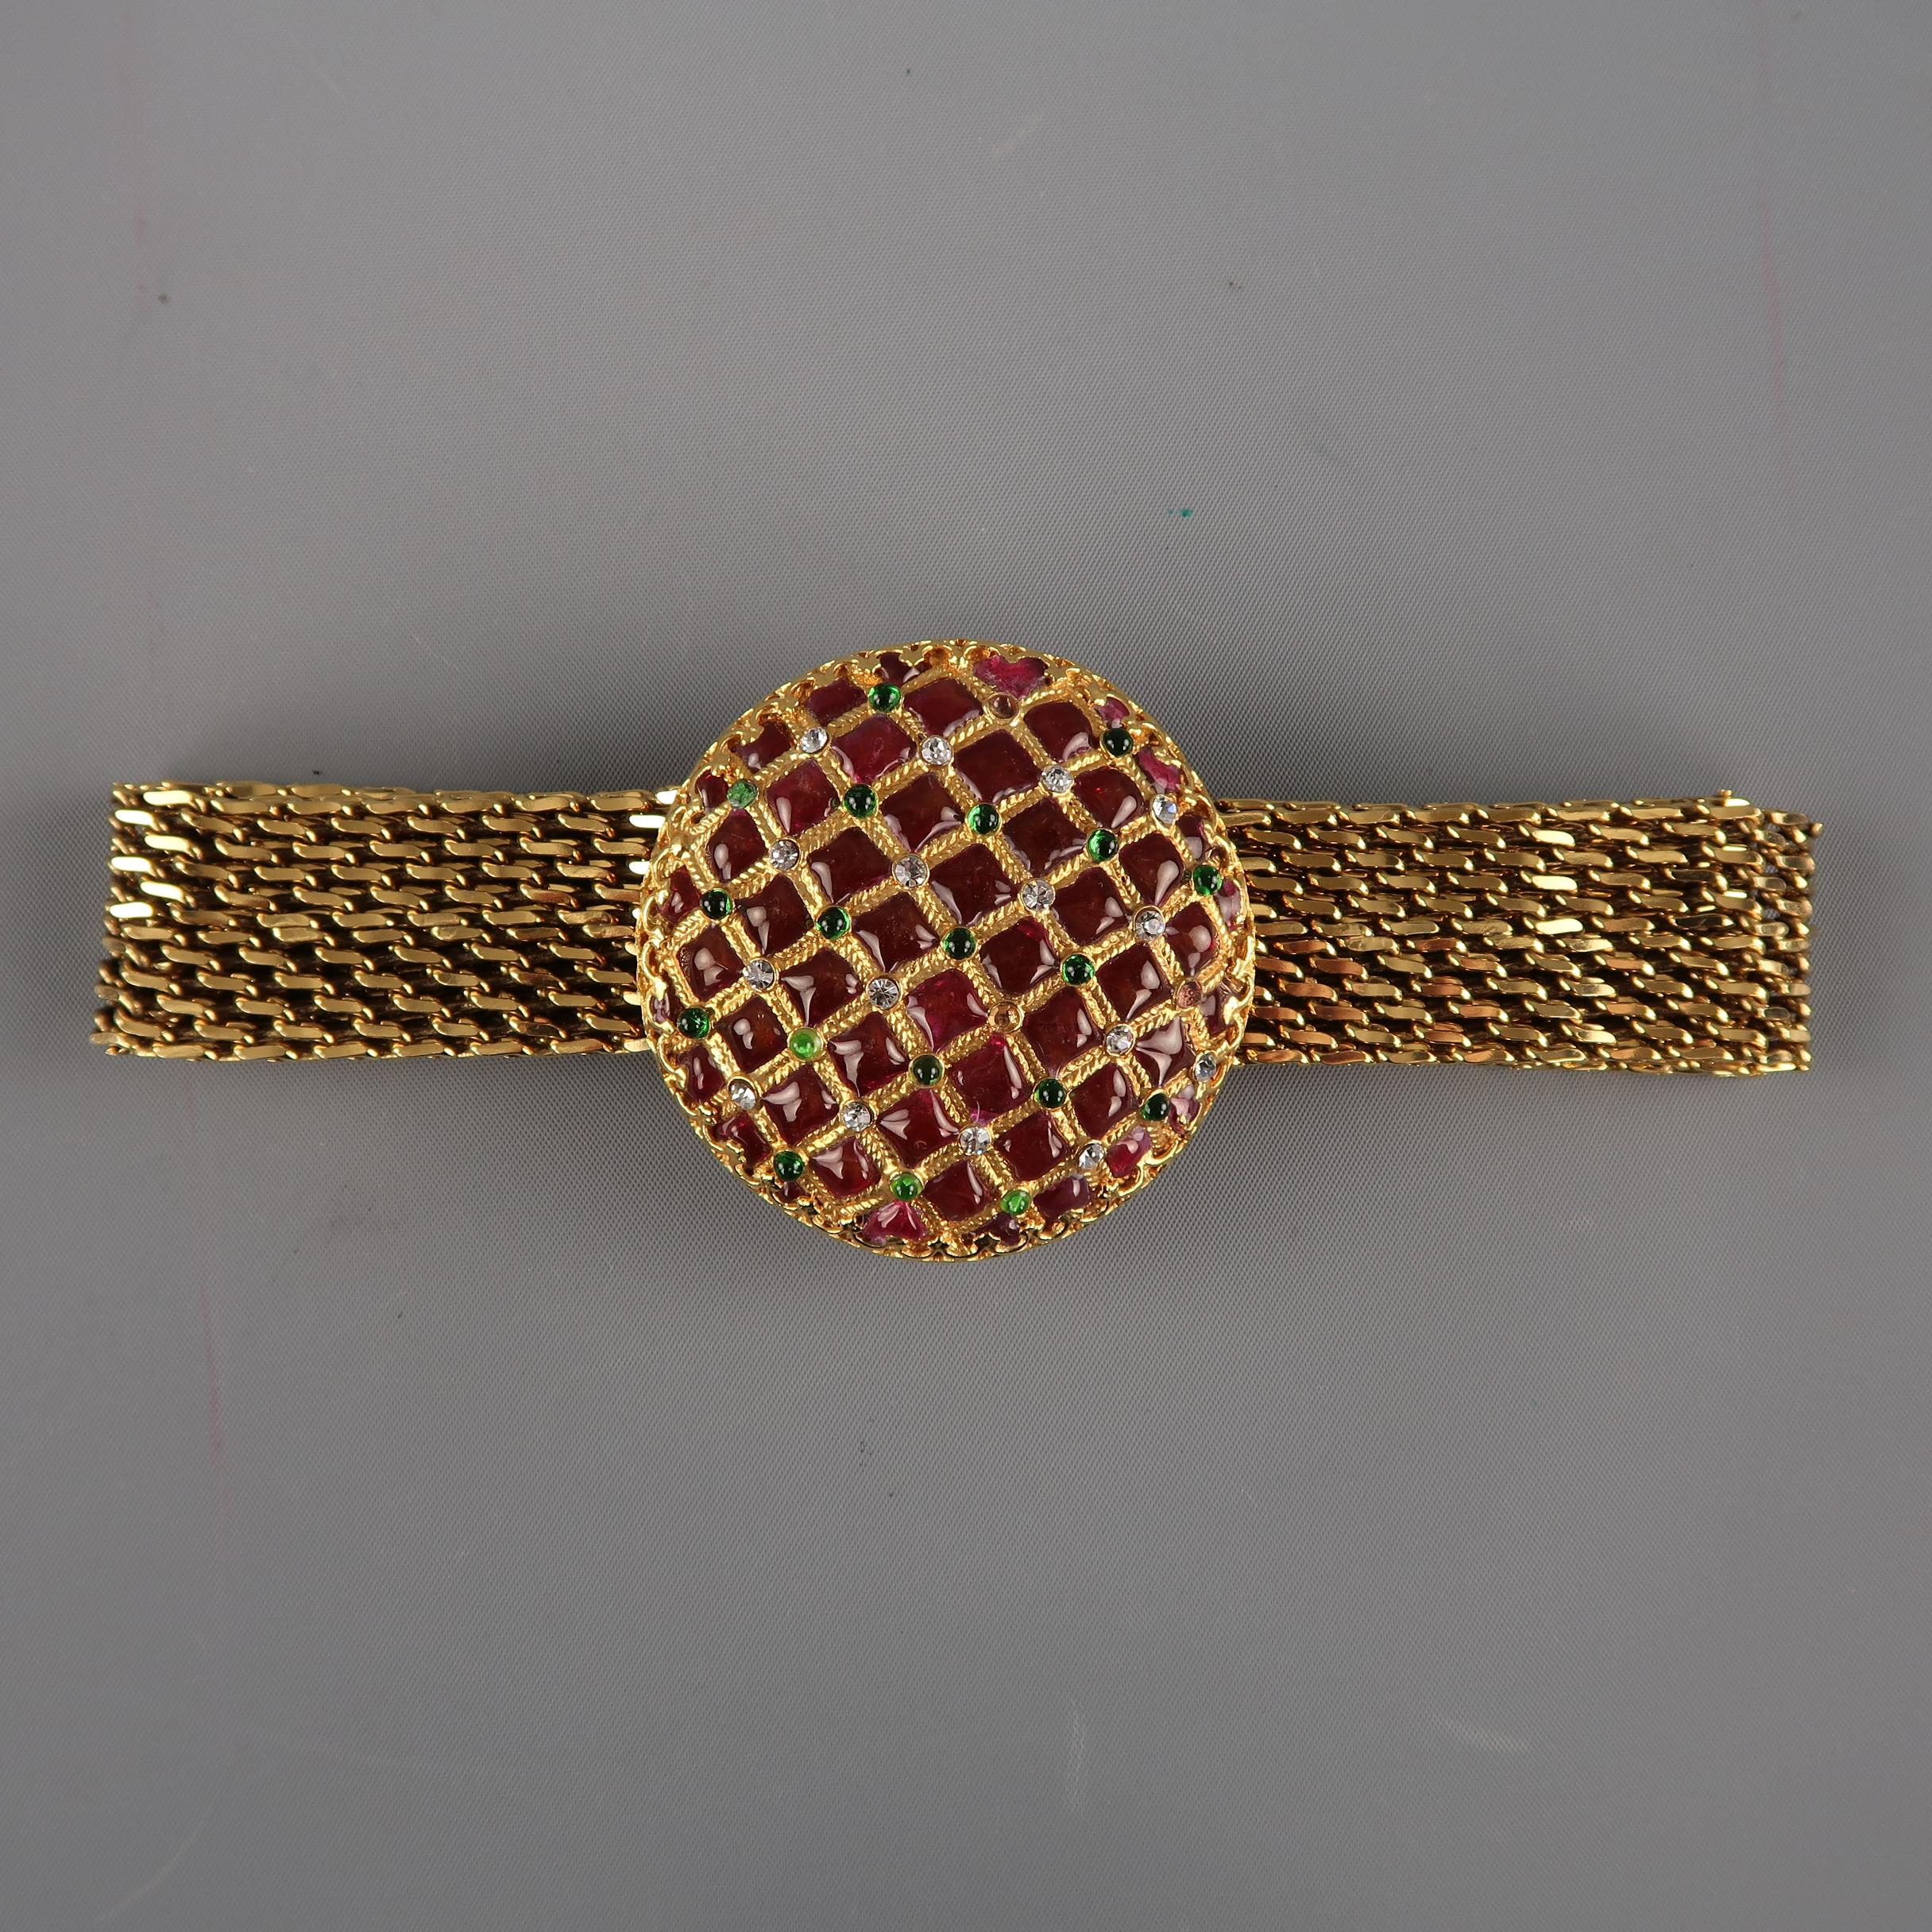 Vintage CHANEL circa Autumn 1997 statement belt comes in gold tone metal and features a crochet strap and round tufted effect Byzantine buckle with burgundy enamel, green gems, and clear rhinestones. Missing three stones. As-is. Made in France.
